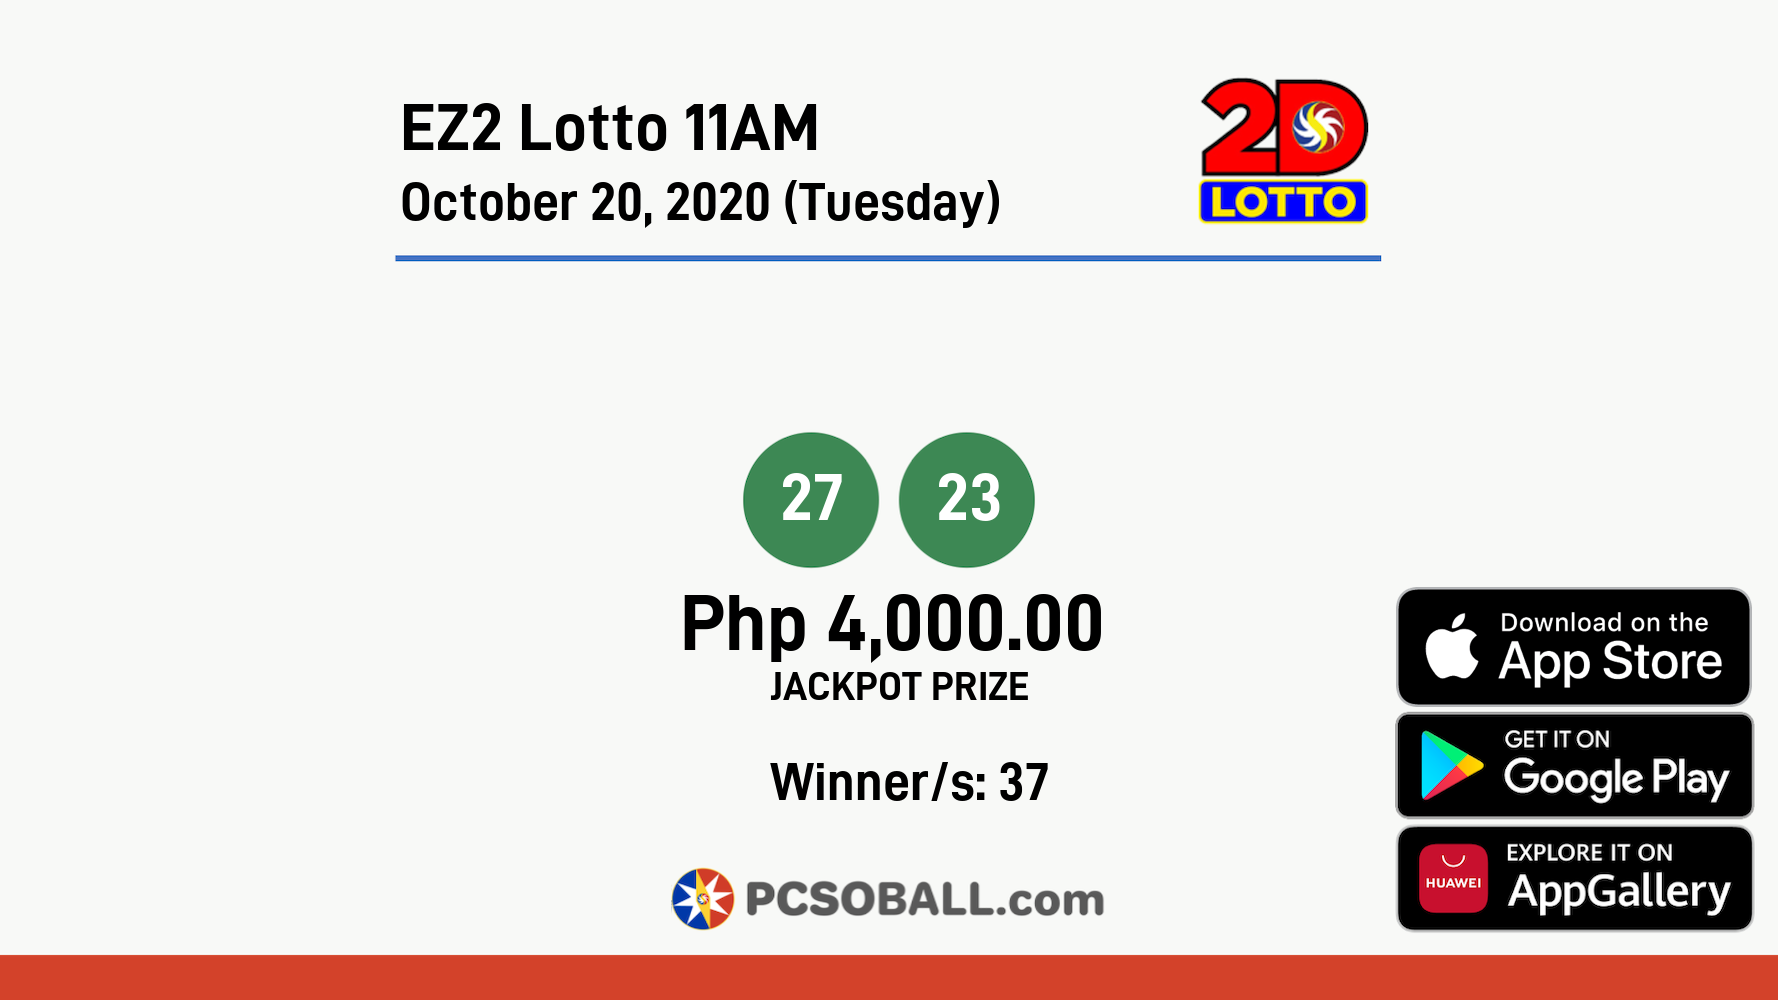 EZ2 Lotto 11AM October 20, 2020 (Tuesday) Result